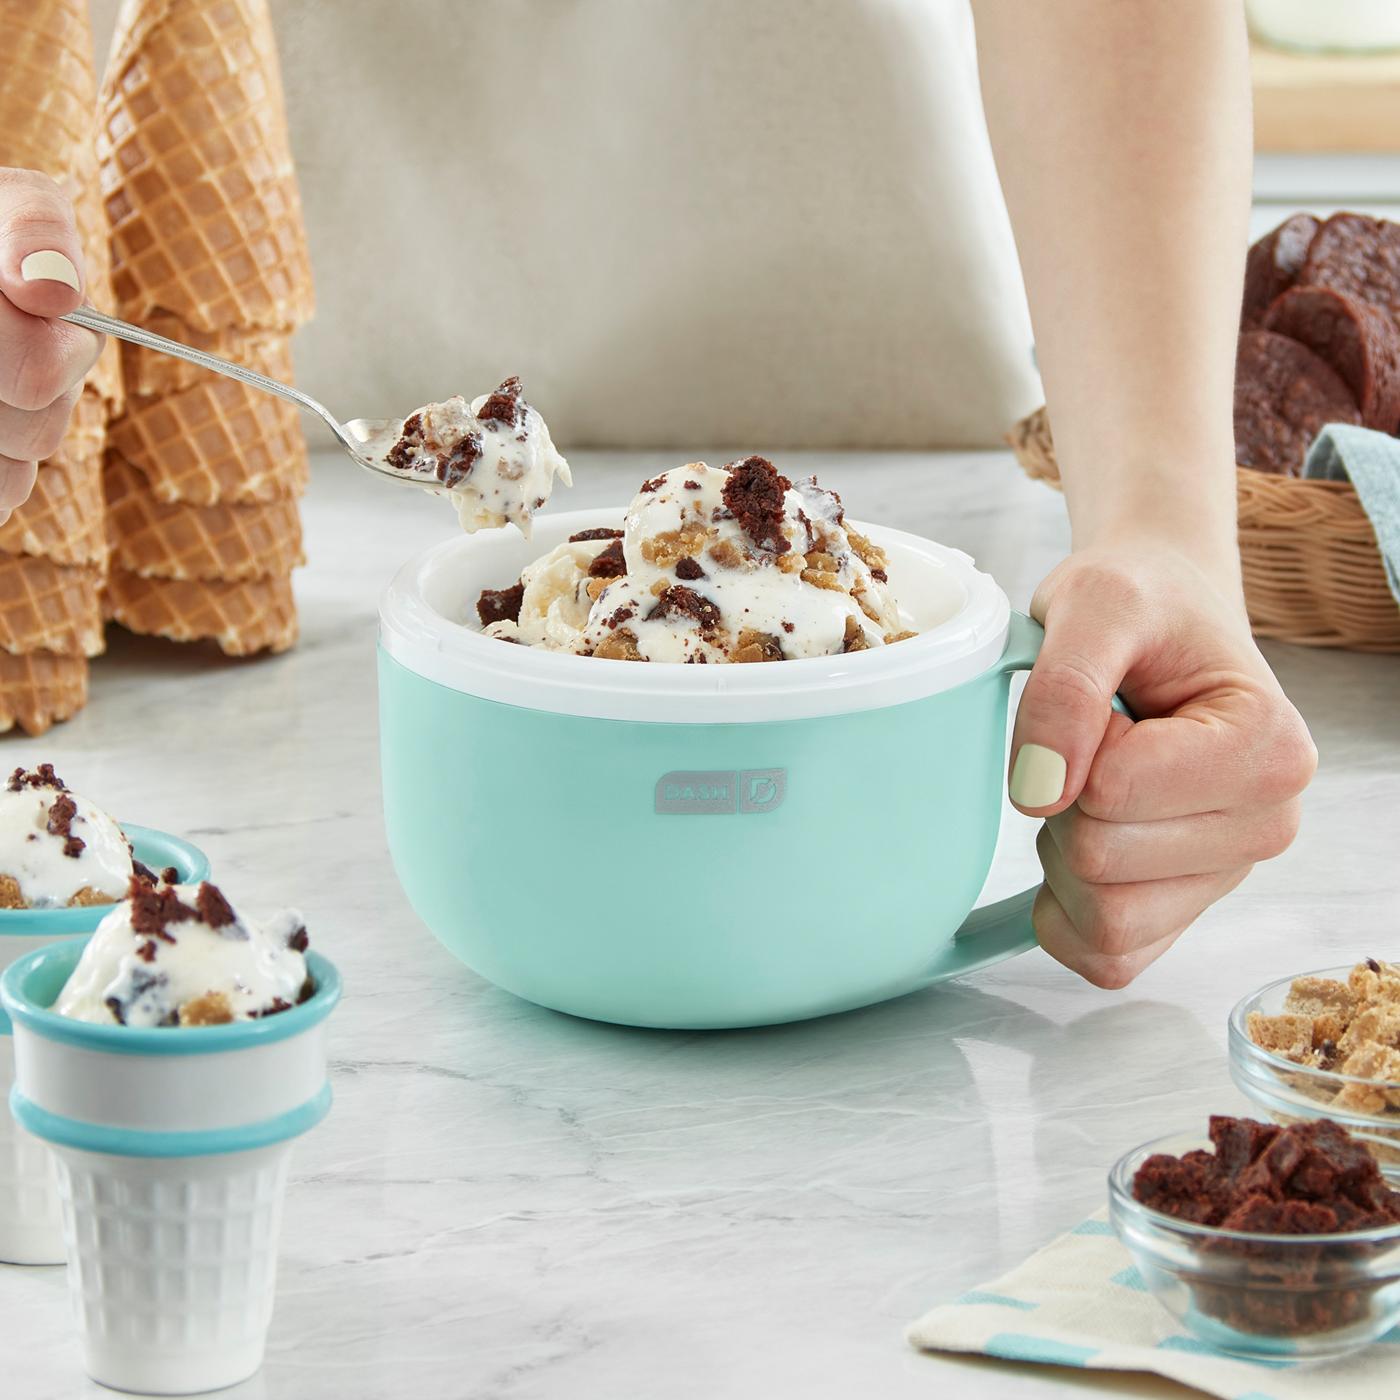 Have you seen MY MUG ICE CREAM MAKER from @bydash ? It's so easy